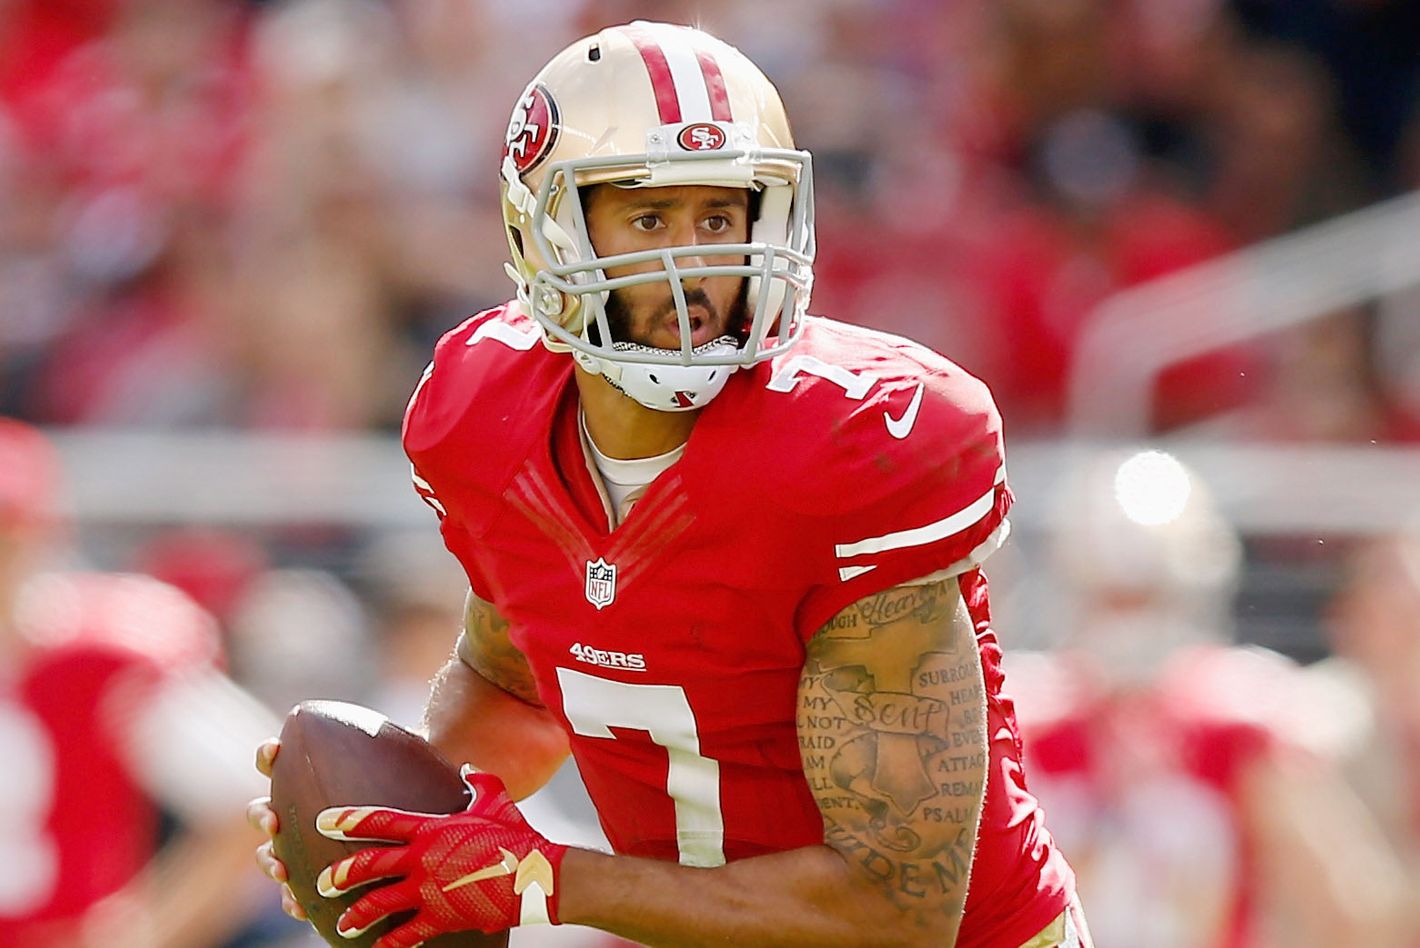 Colin Kaepernick will donate his jersey sale proceeds to communities in need